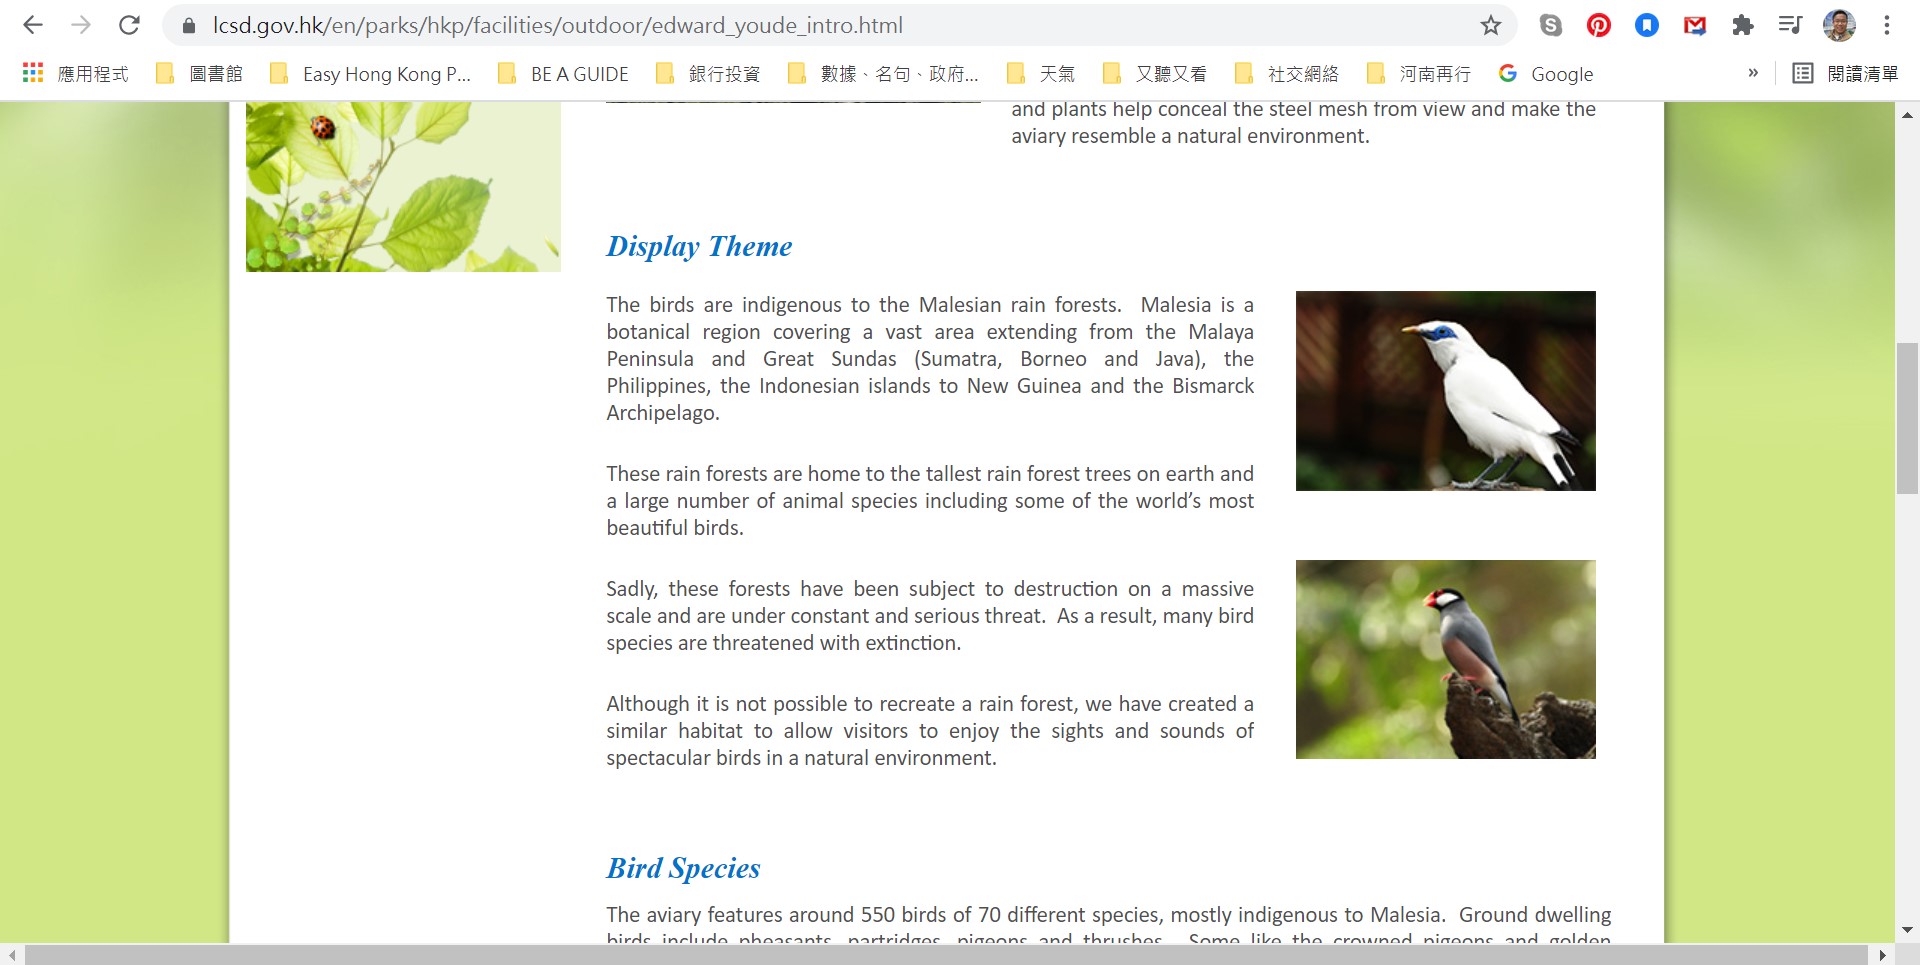 Web page of the Edward Youde Aviary of Hong Kong Park